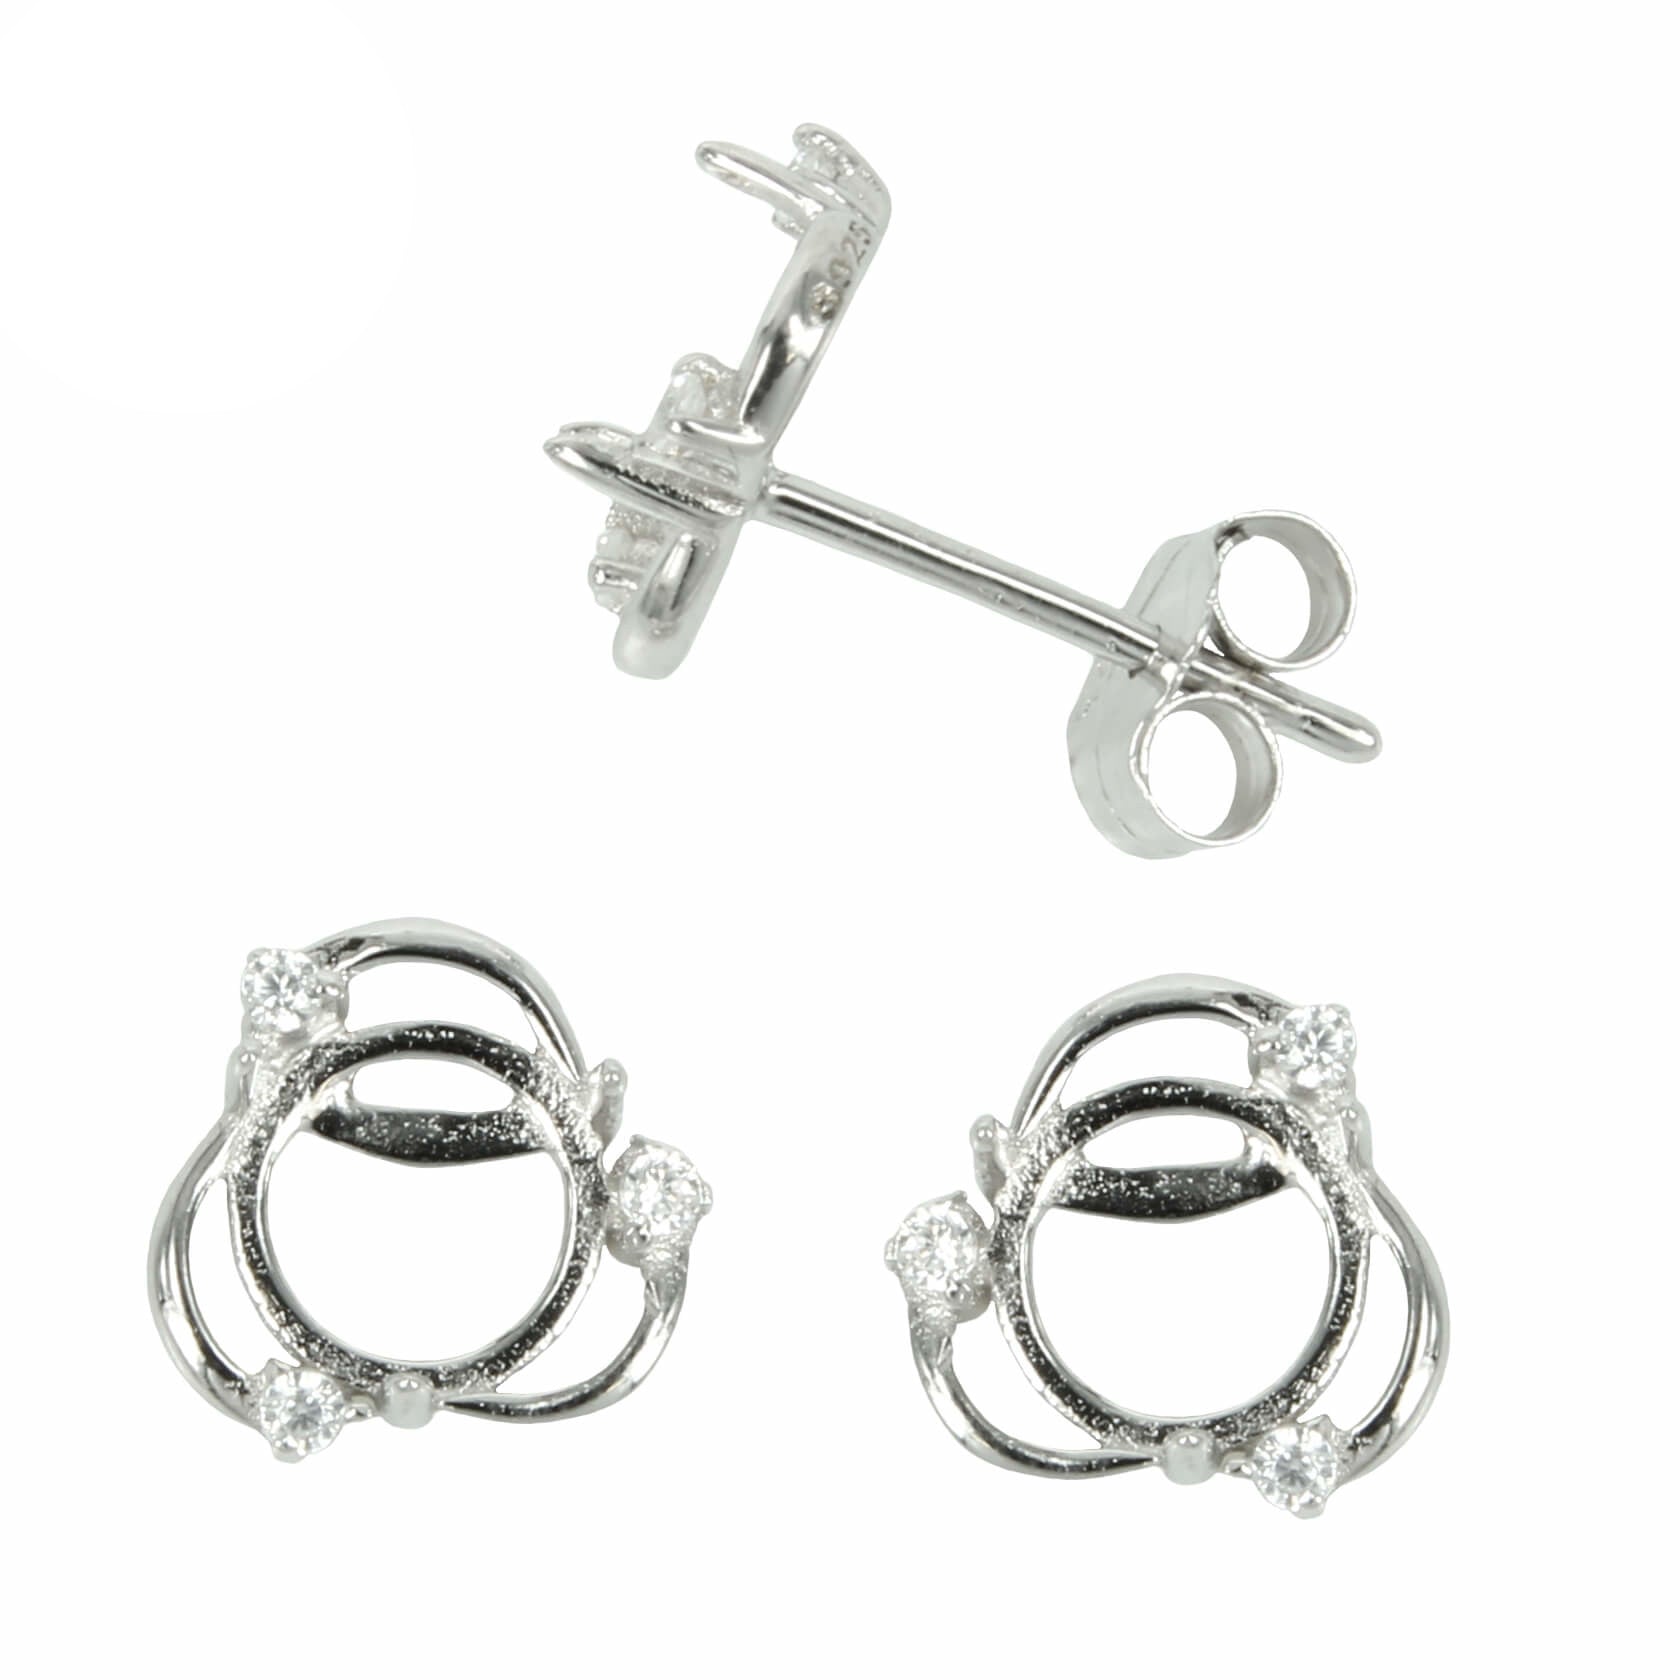 Trio of CZ's Border Stud Earrings with Round Prong Mounting in Sterling Silver for 6mm Stones (Small)